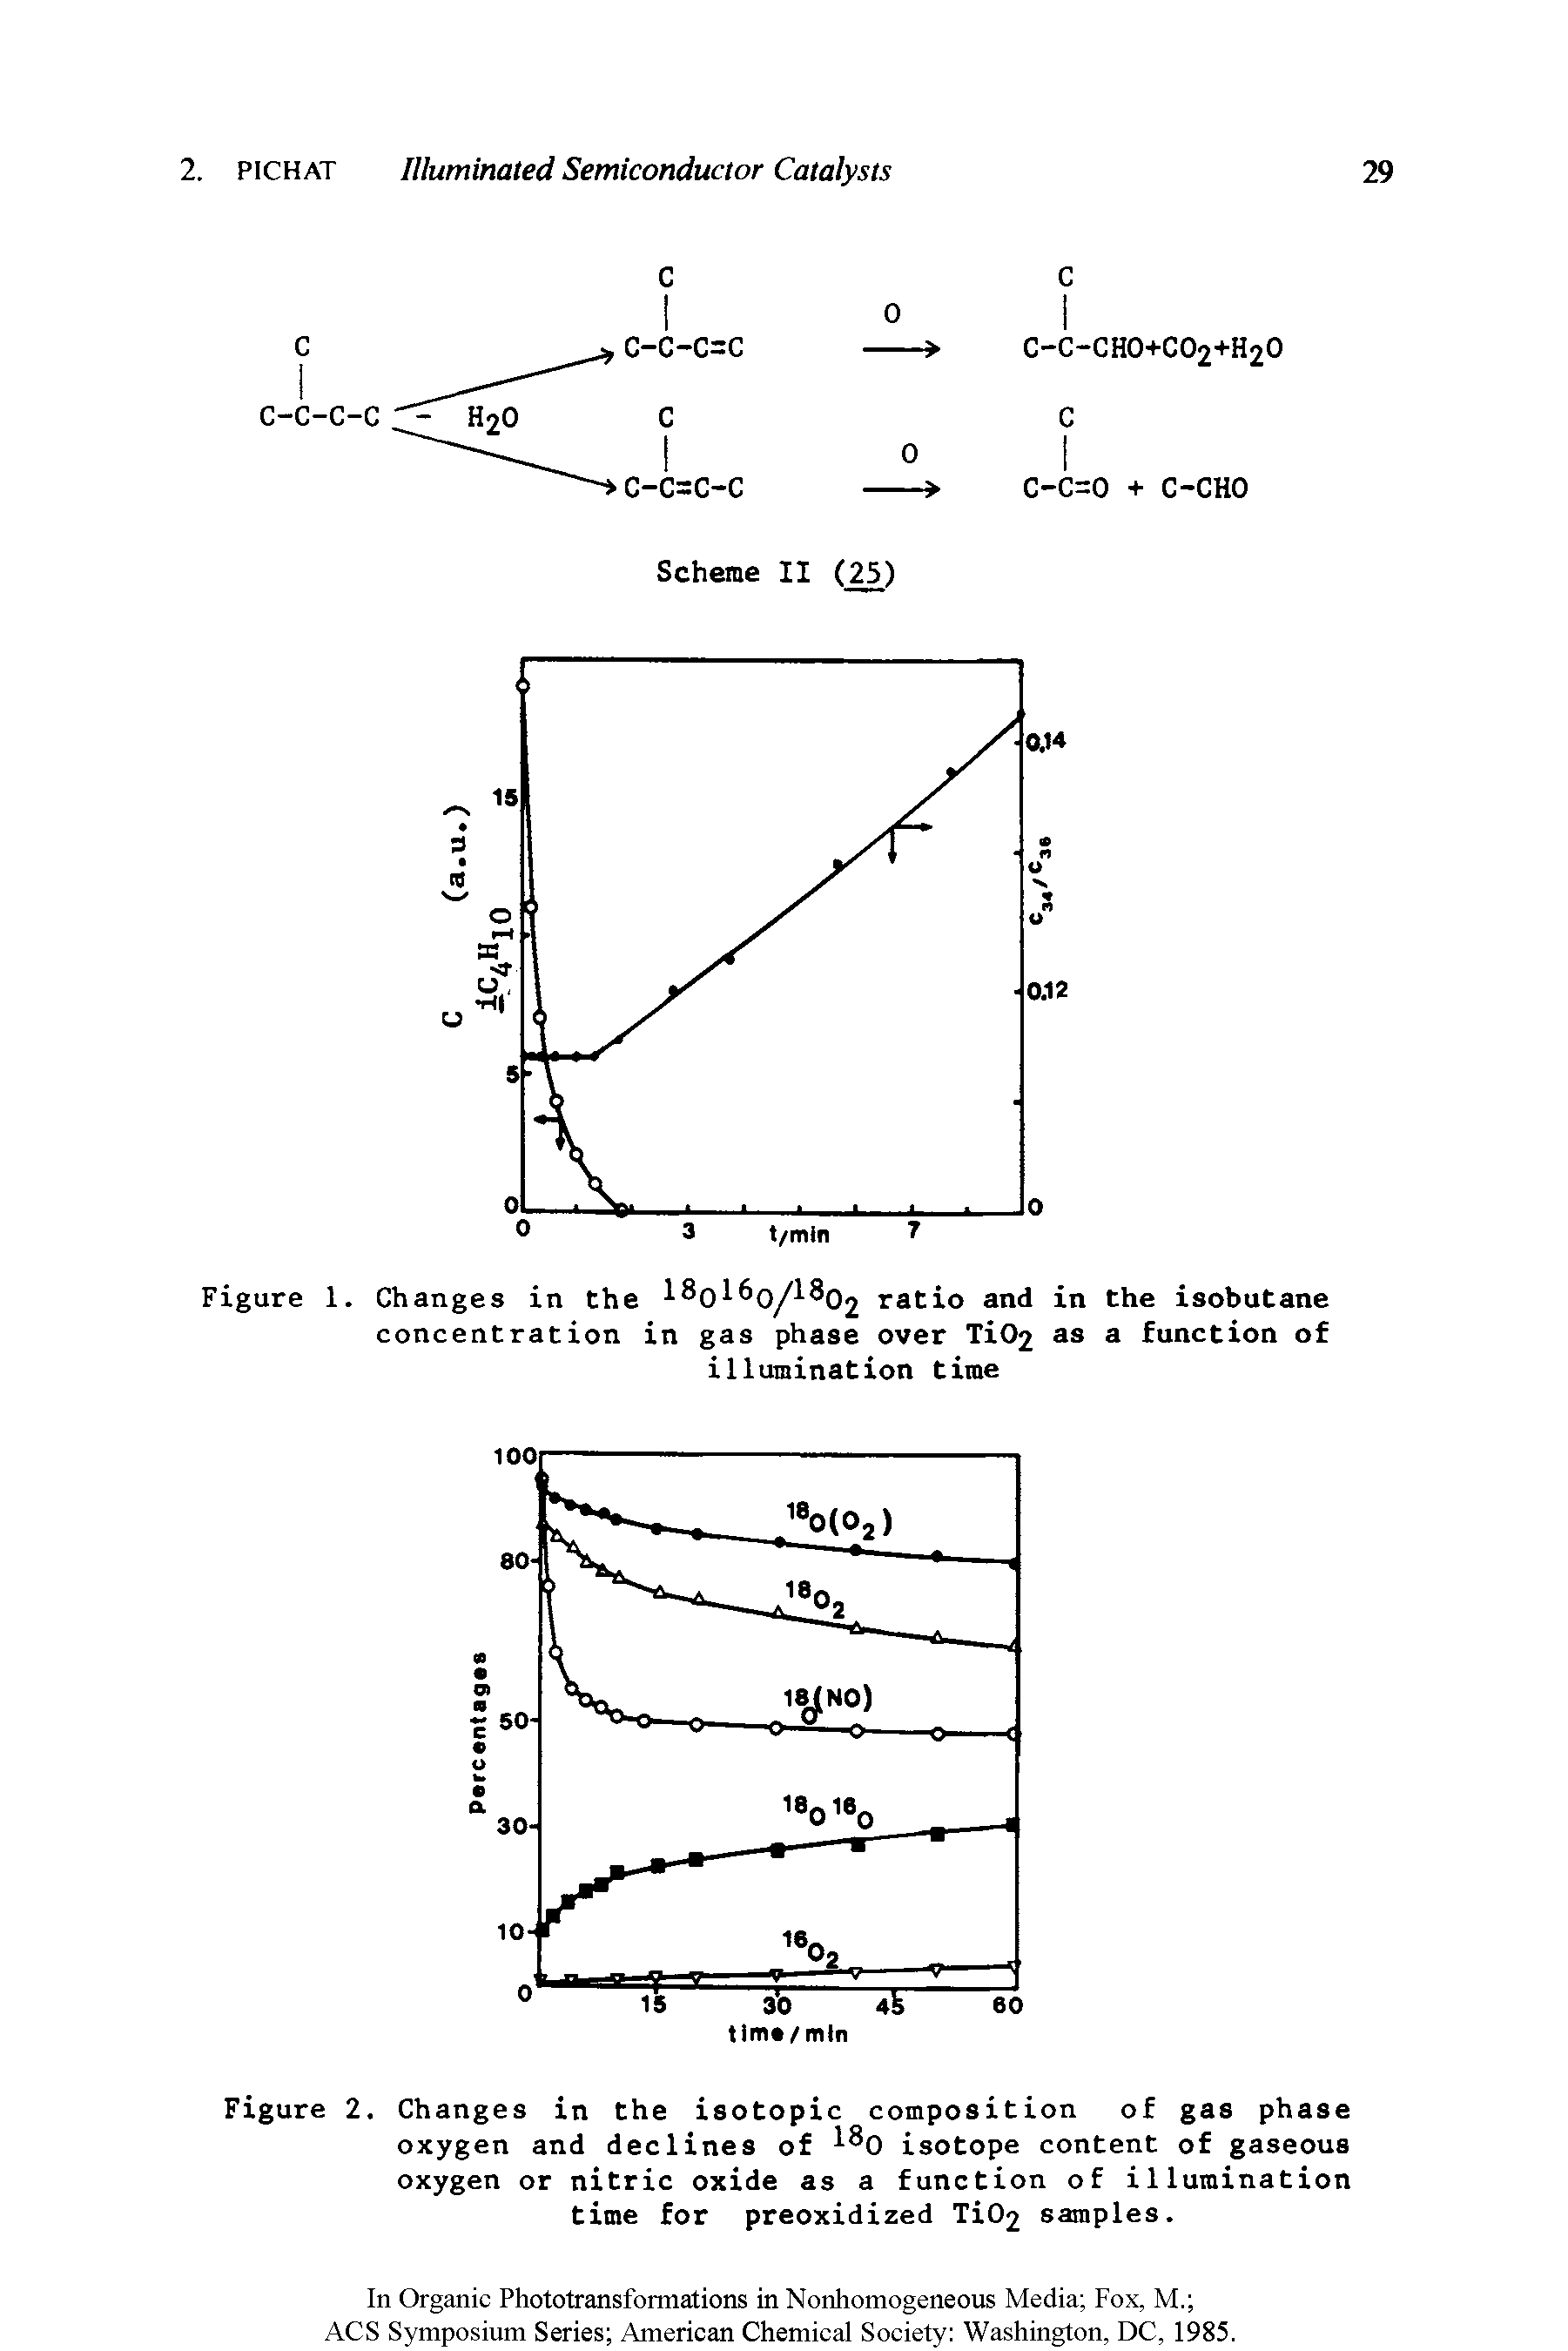 Figure 2. Changes in the isotopic composition of gas phase oxygen and declines of 0 isotope content of gaseous oxygen or nitric oxide as a function of illumination time for preoxidized Ti02 samples.